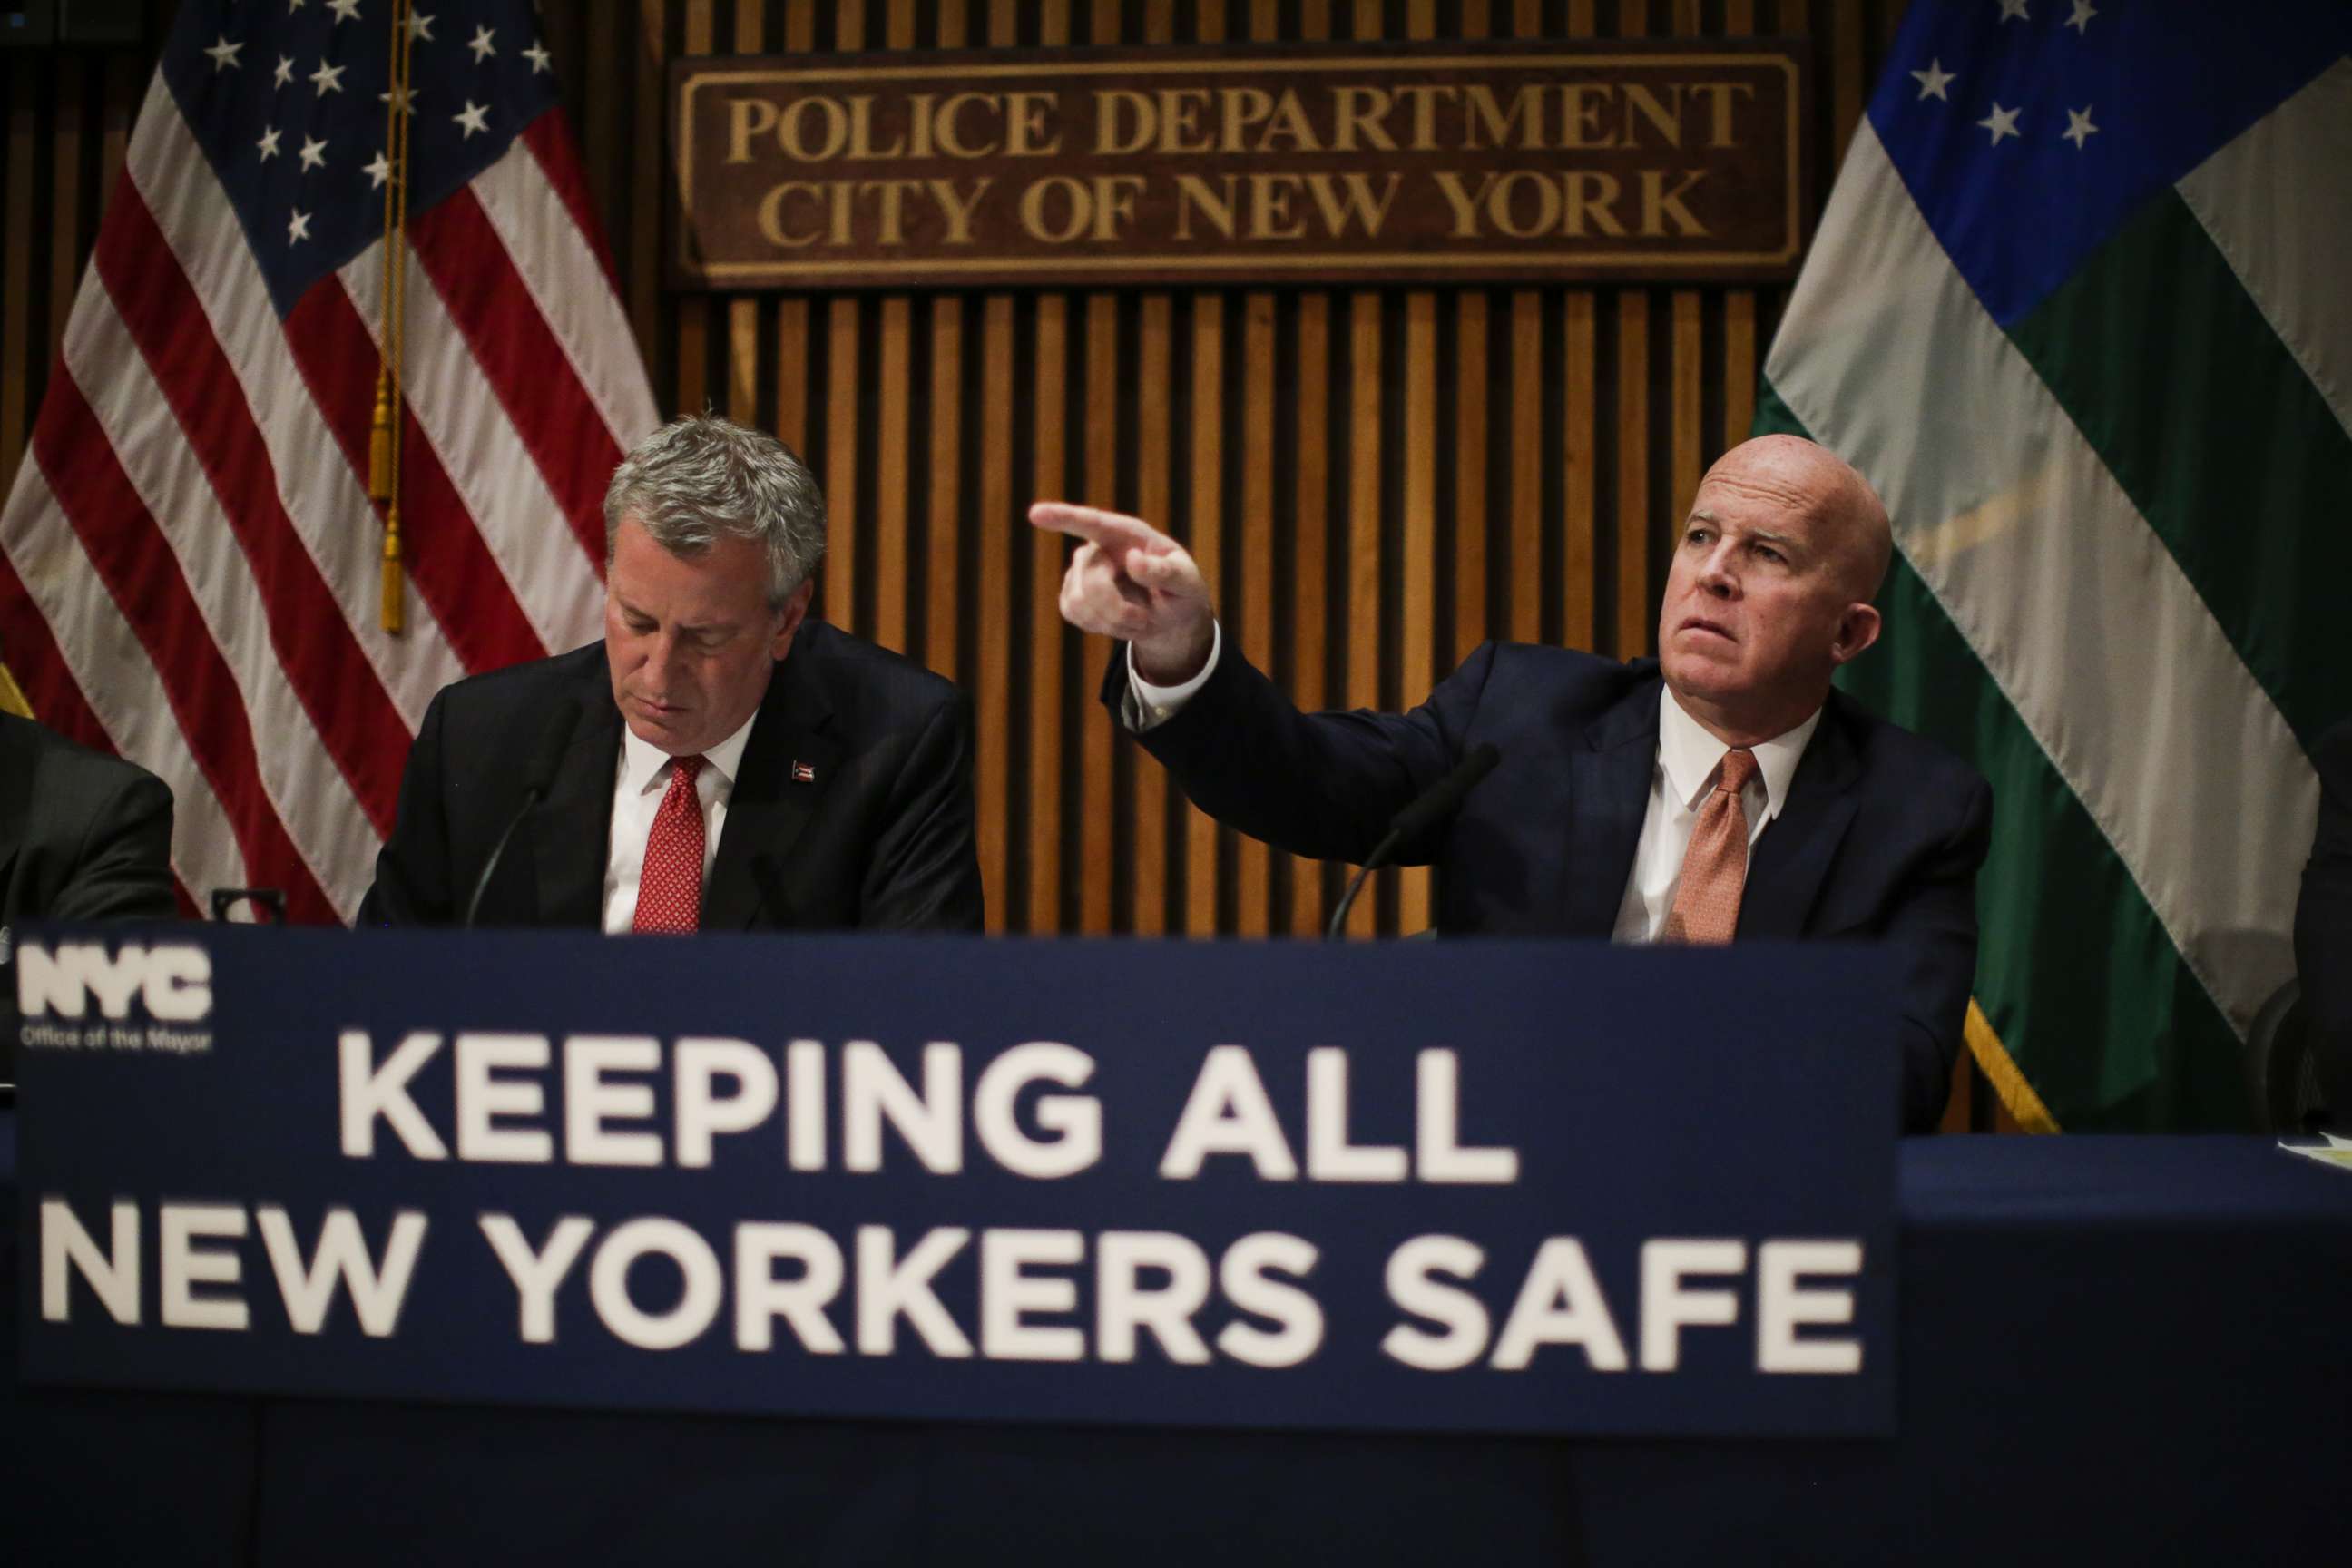 PHOTO: New York City Police Commissioner James O'Neill (R) speaks during a press conference about security issues for the marathon next to NYC Mayor Bill de Blasio, Nov. 3, 2017 in New York City.